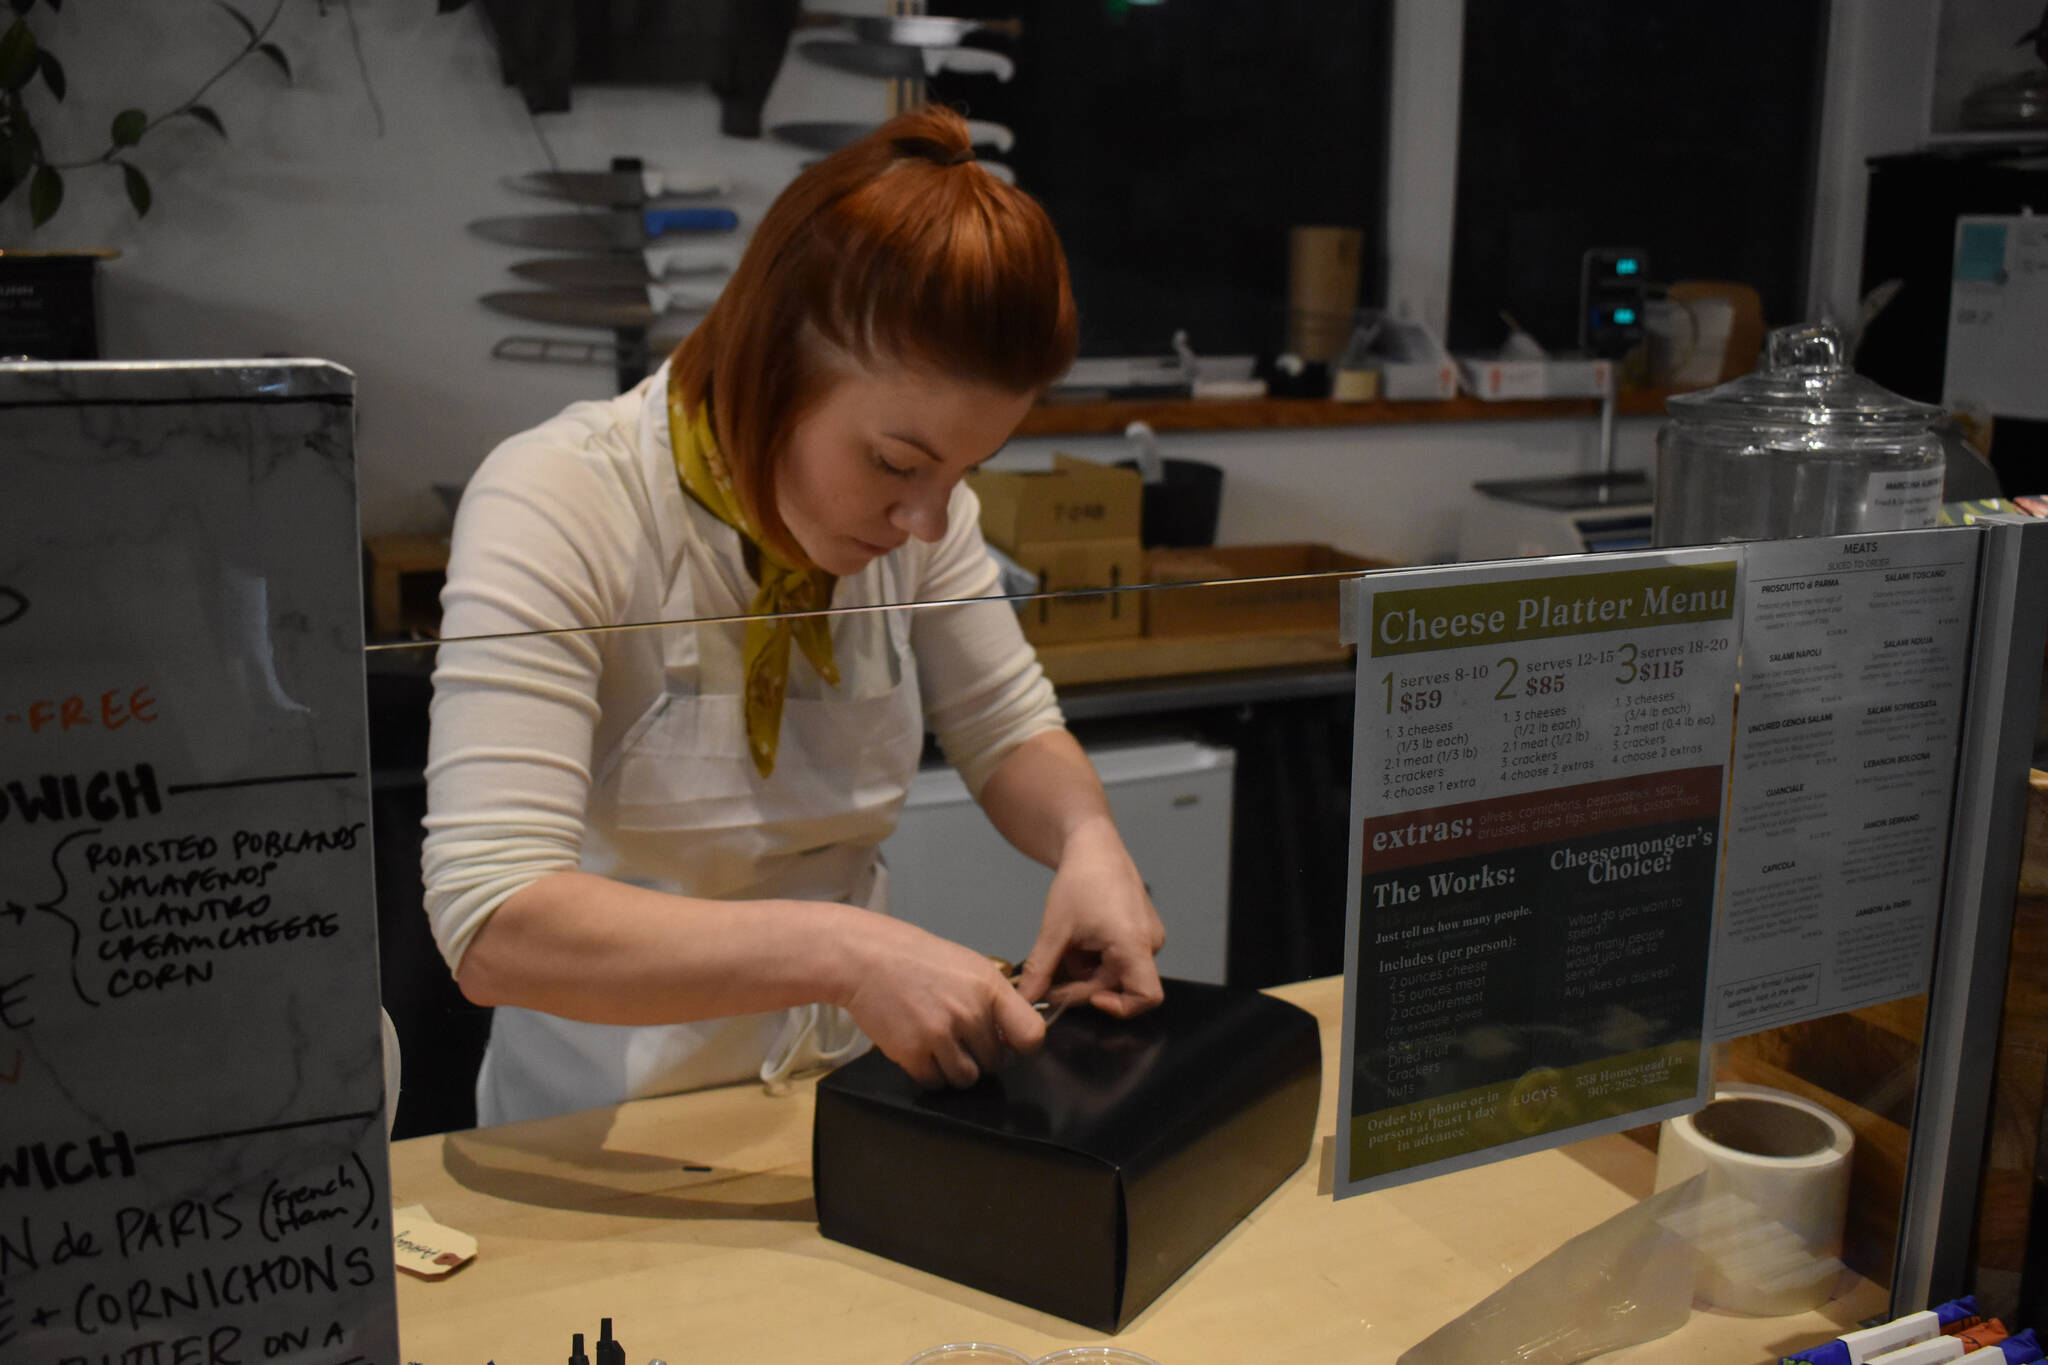 Kelsey Shields applies a “Lucy’s Market” sticker to a Cheese of the Month subscription box on Friday, Jan. 6, 2023 at Lucy’s Market in Soldotna, Alaska. (Jake Dye/Peninsula Clarion)